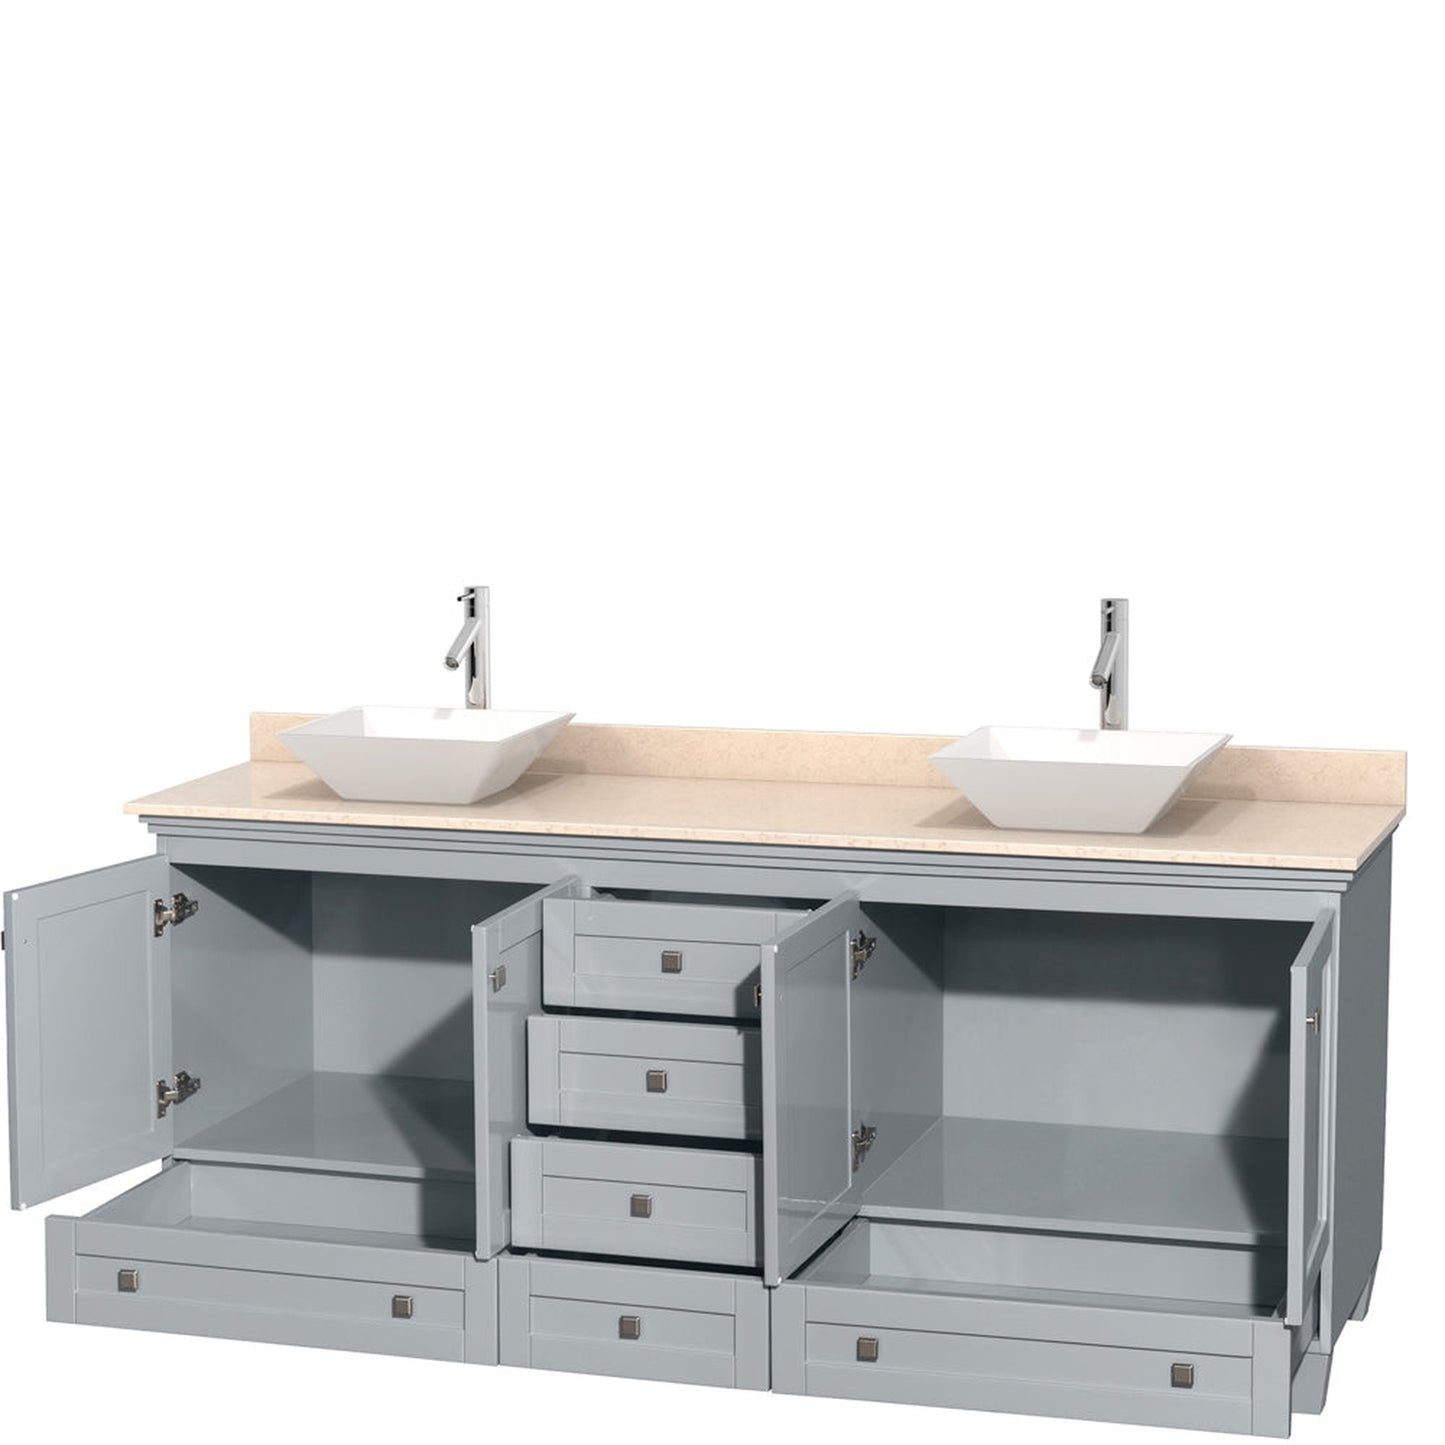 Wyndham Collection Acclaim 80" Double Bathroom Vanity in Oyster Gray With Ivory Marble Countertop & Pyra White Porcelain Sink